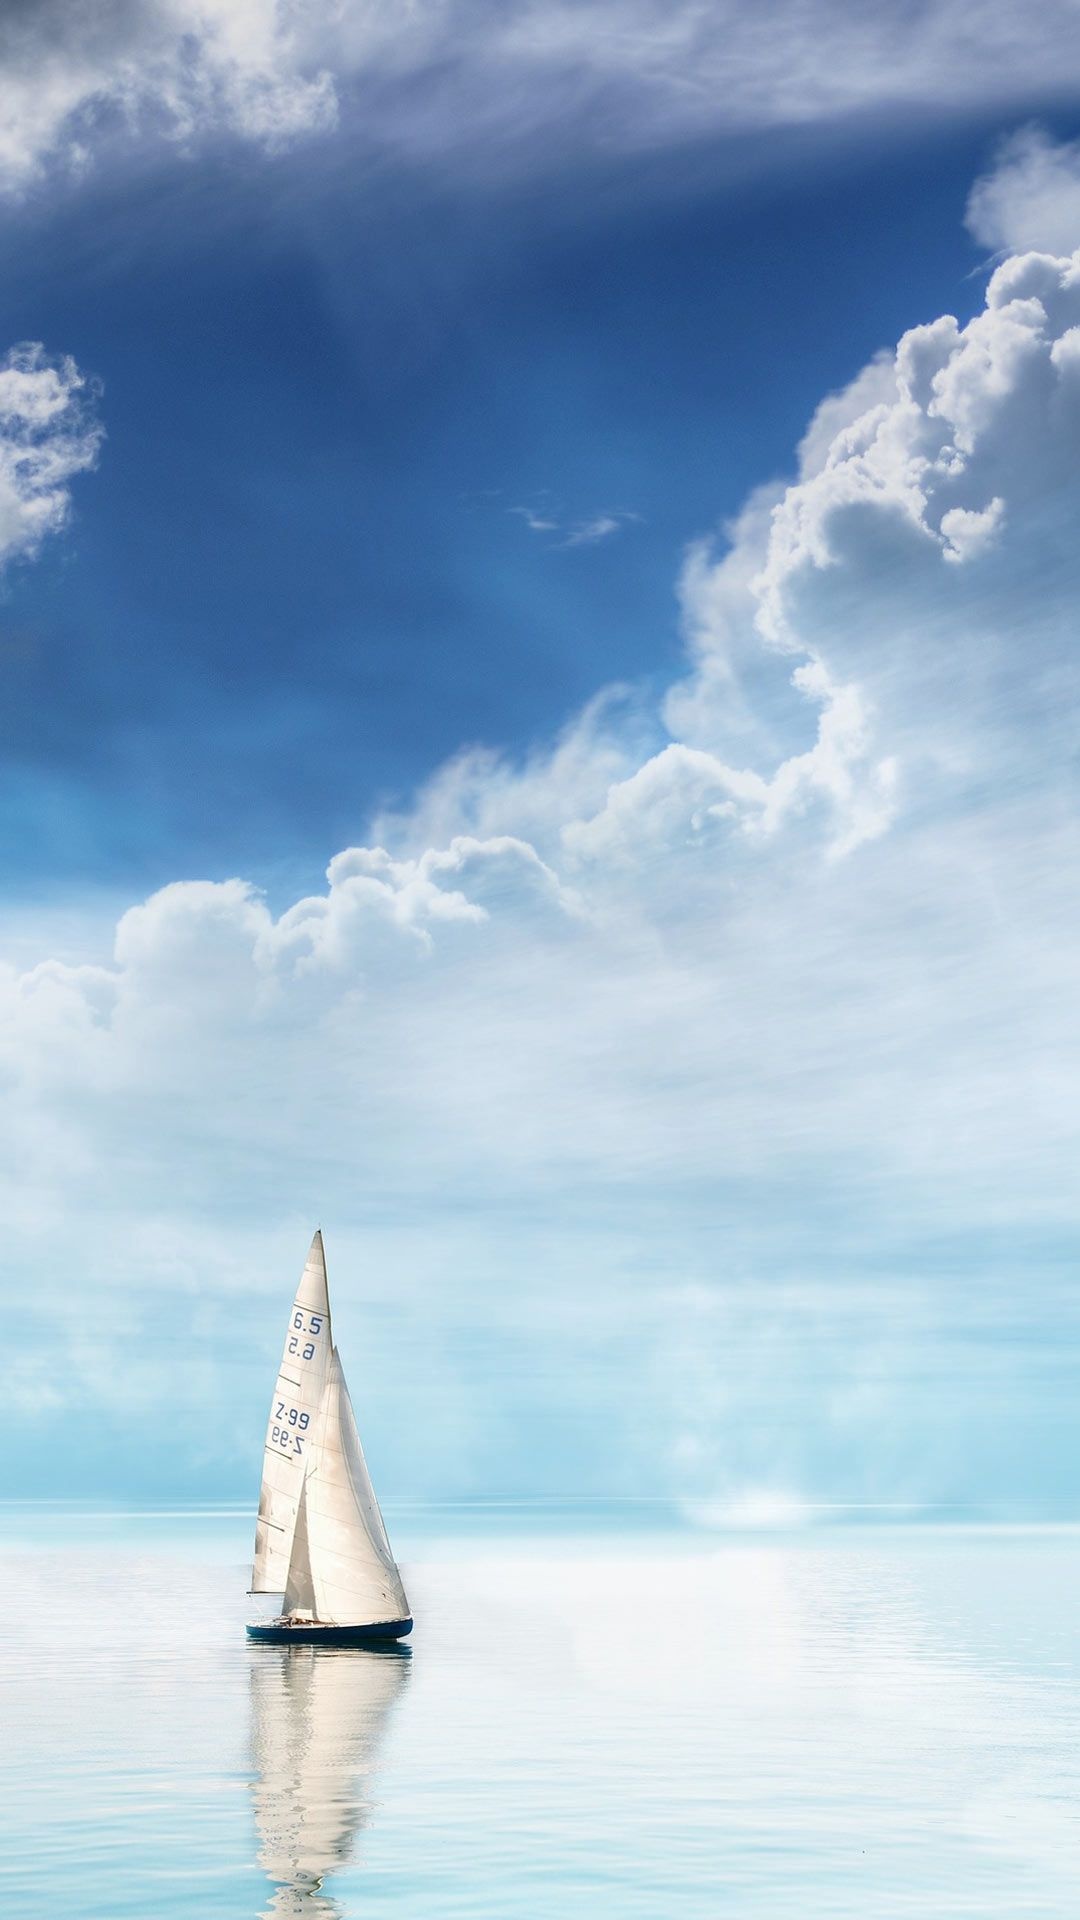 Sail Boat: A vessel propelled by sail, Blue-water cruising. 1080x1920 Full HD Wallpaper.